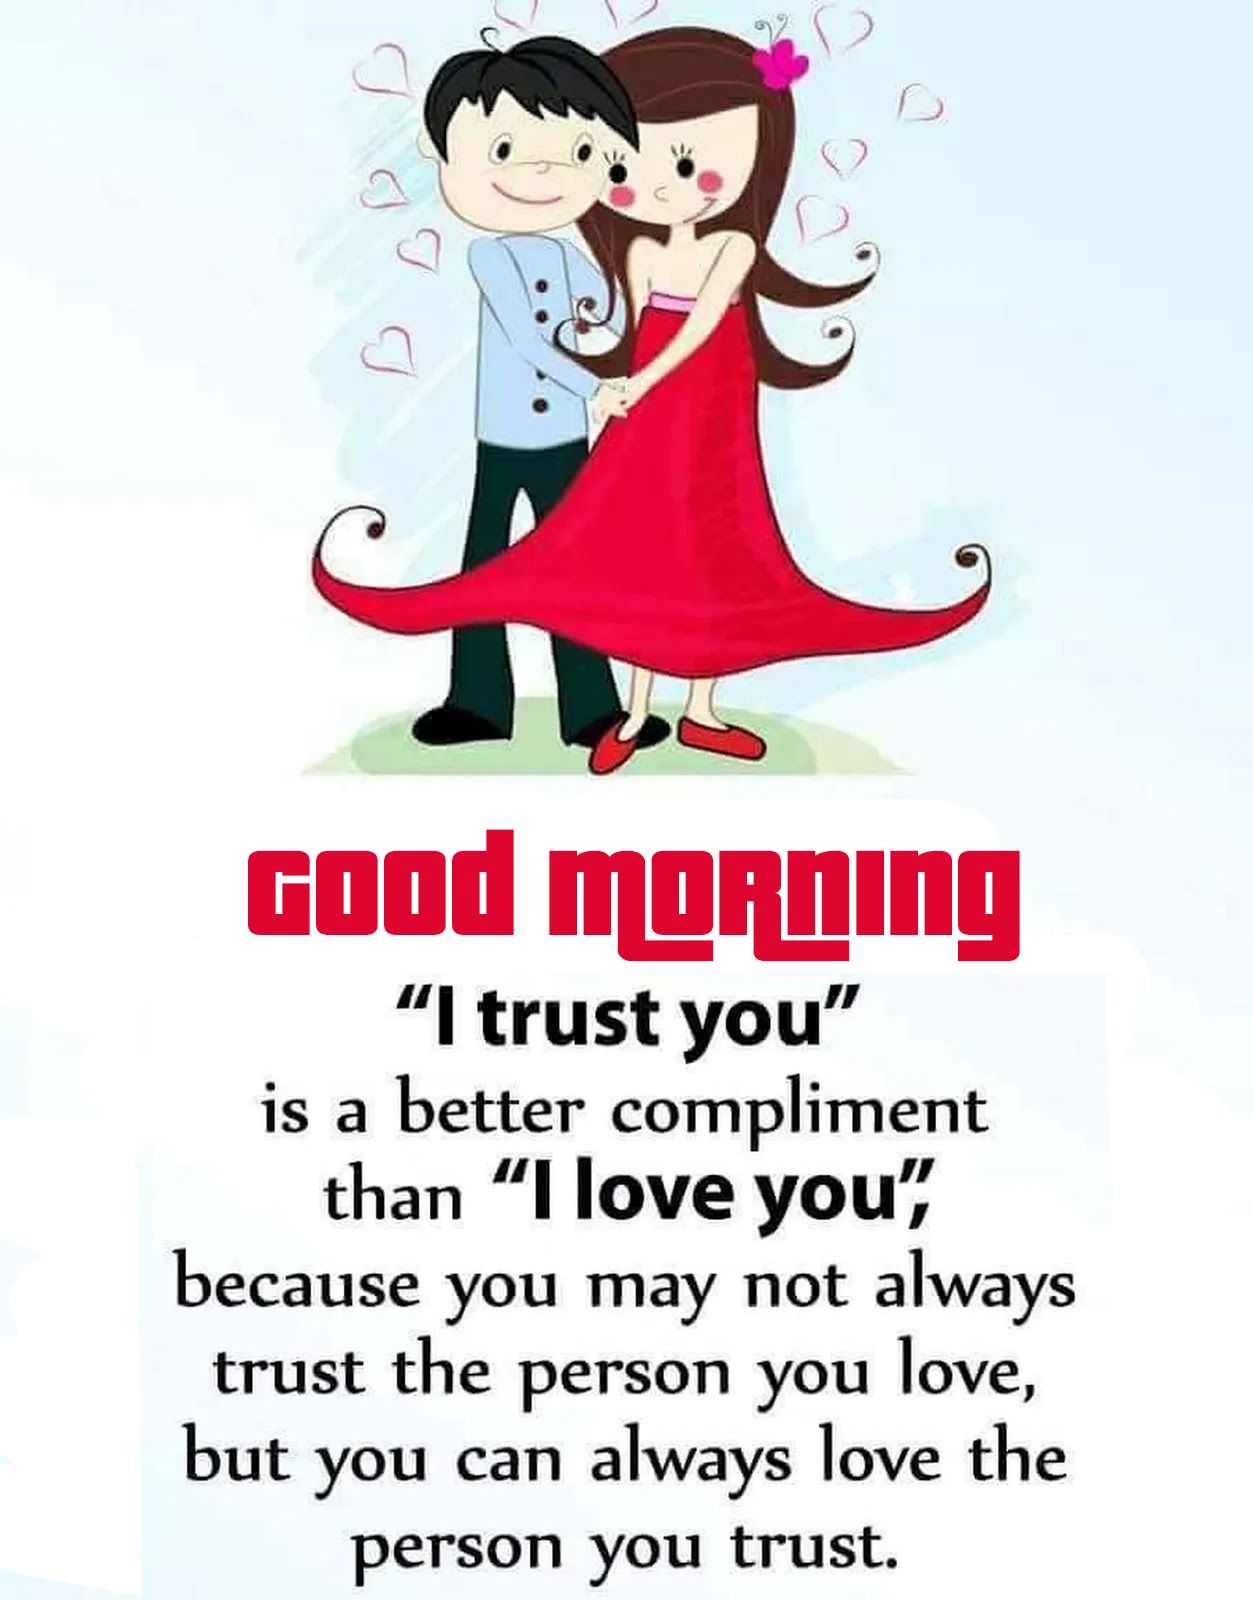 Good Morning Love Cartoon Quotes Morning Image, Quotes, Wishes, Messages, greetings & eCards